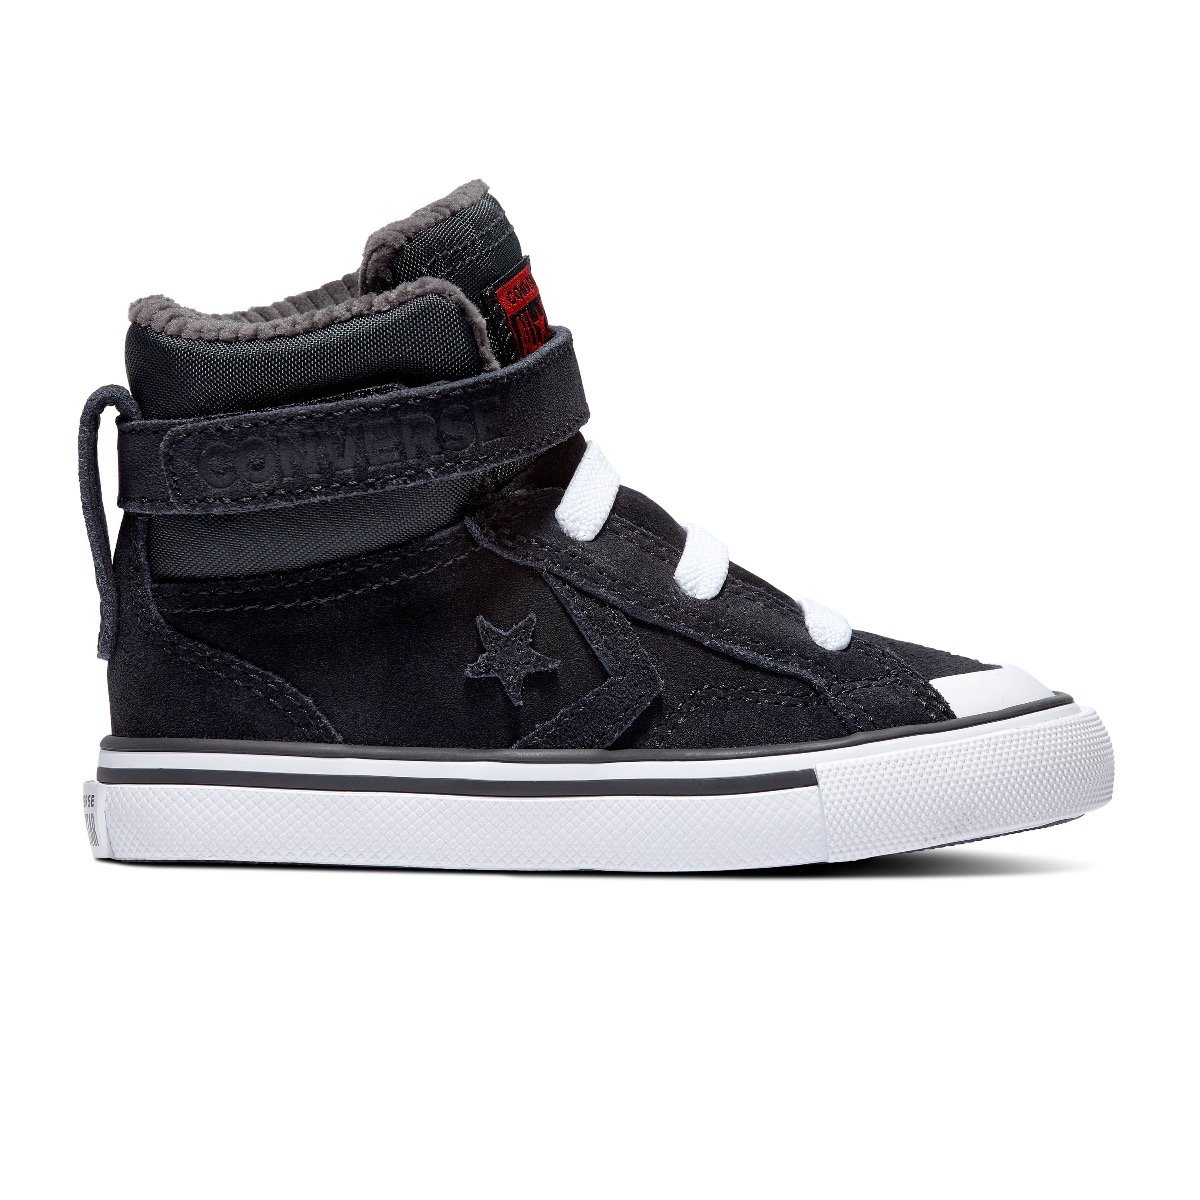 Converse All Stars Space Ride 765281C Zwart / Wit / Rood maat